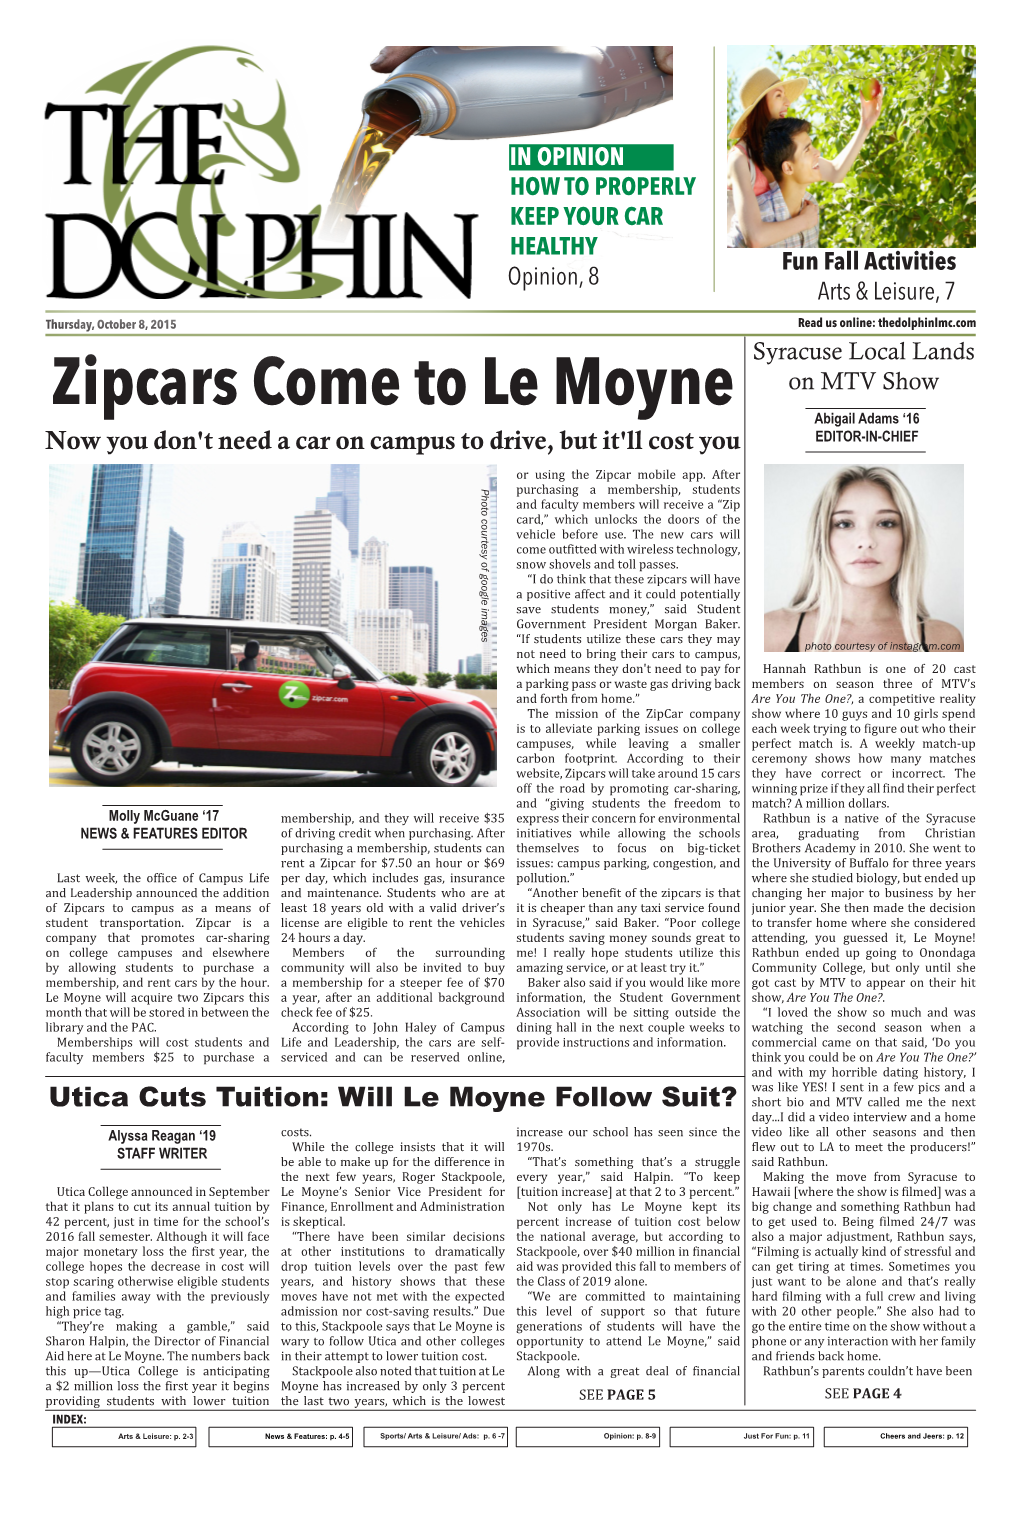 Zipcars Come to Le Moyne on MTV Show Abigail Adams ‘16 Now You Don't Need a Car on Campus to Drive, but It'll Cost You EDITOR-IN-CHIEF